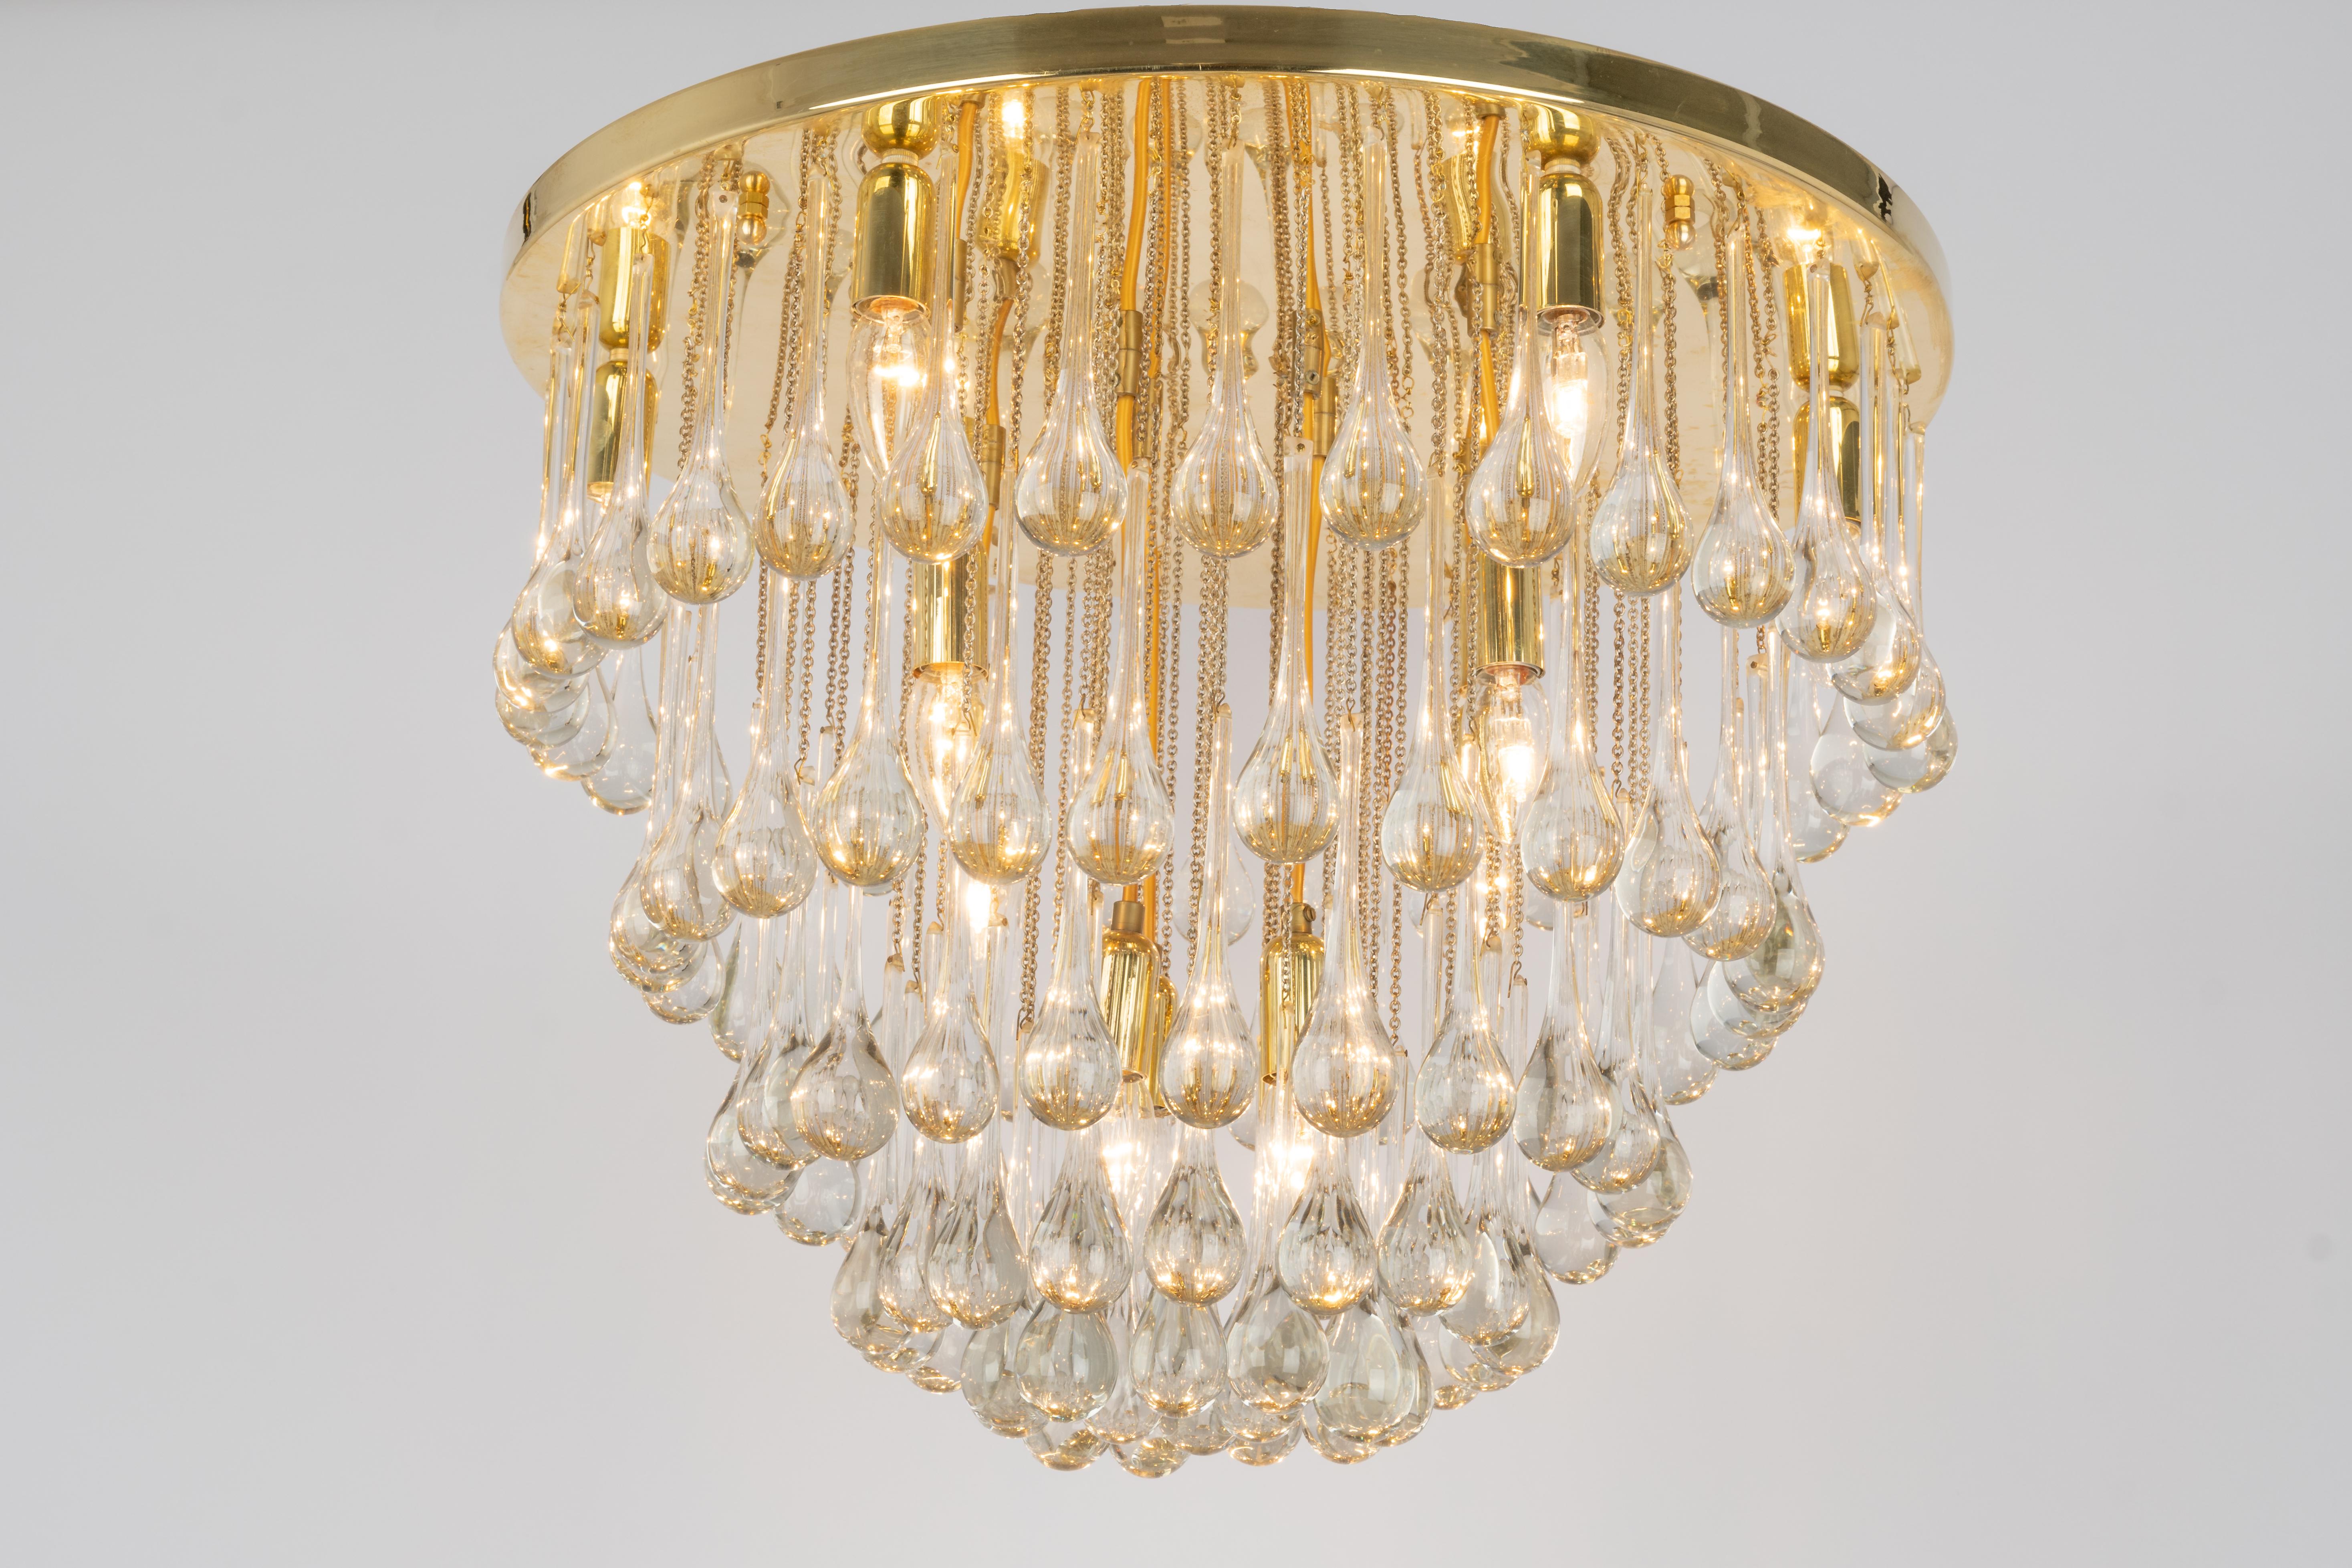 1 of 3 Large Murano Glass Tear Drop Chandelier, Christoph Palme, Germany, 1970s For Sale 3